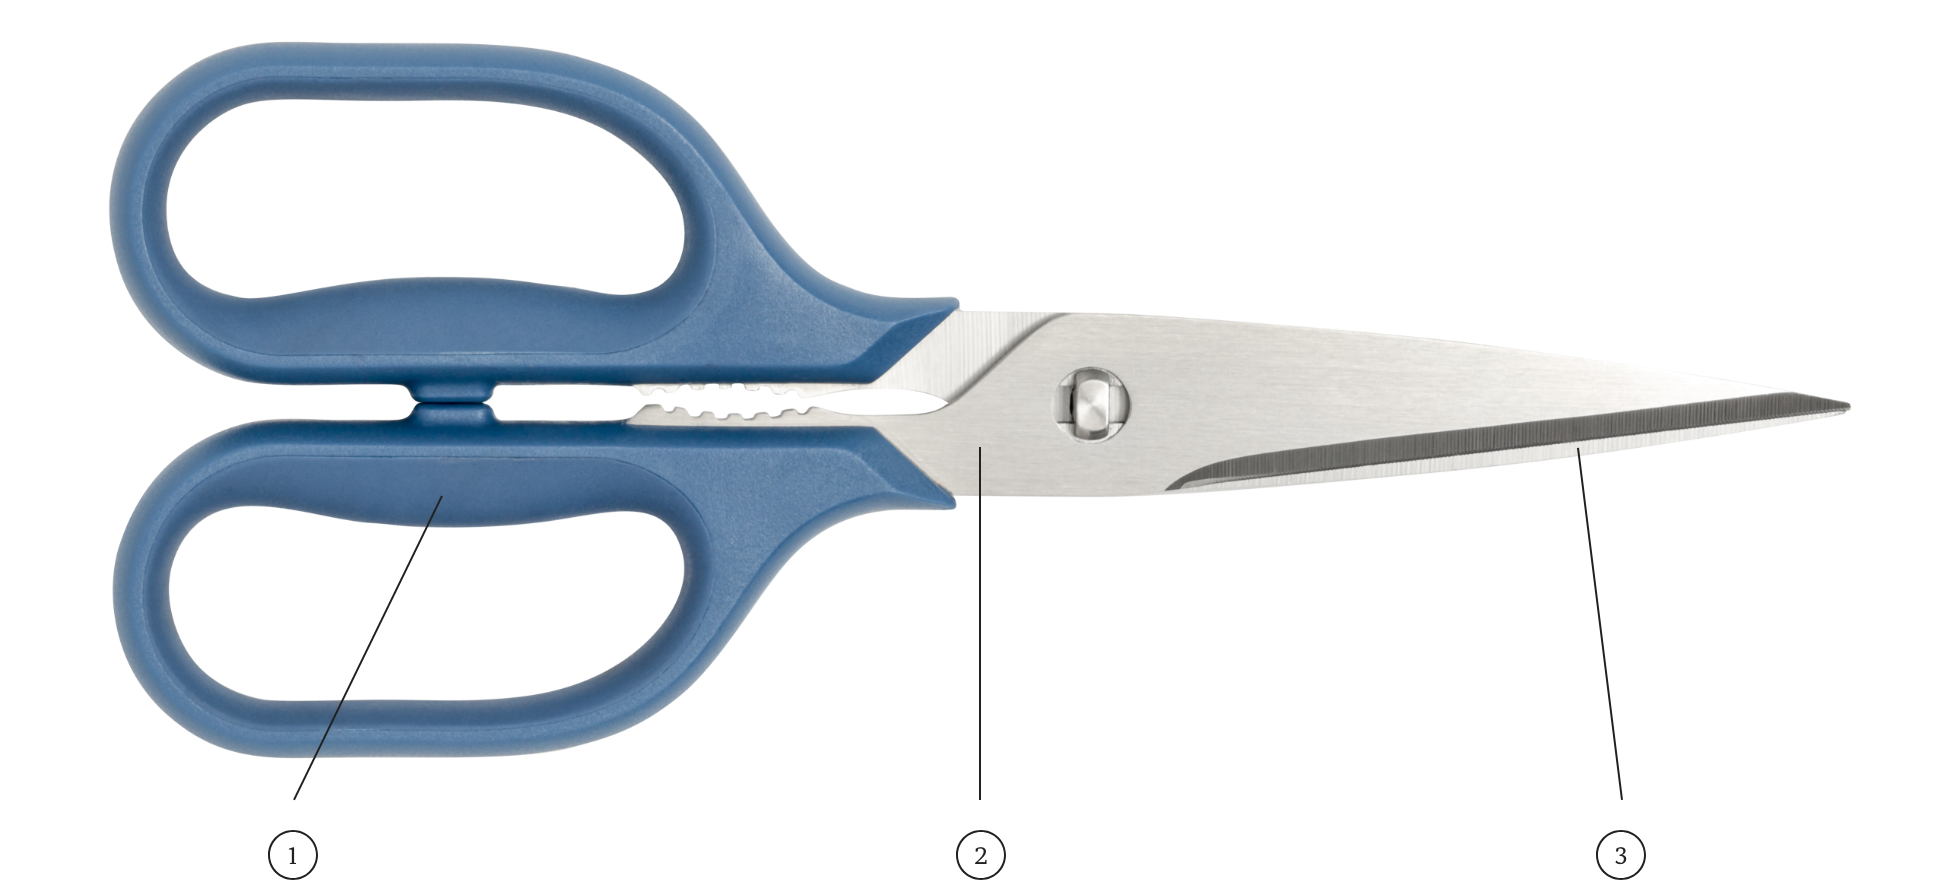 Blue Misen Kitchen Shears with blades closed. Numbered feature indicators highlight the ergonomic handle, durable steel pivot, and blades.